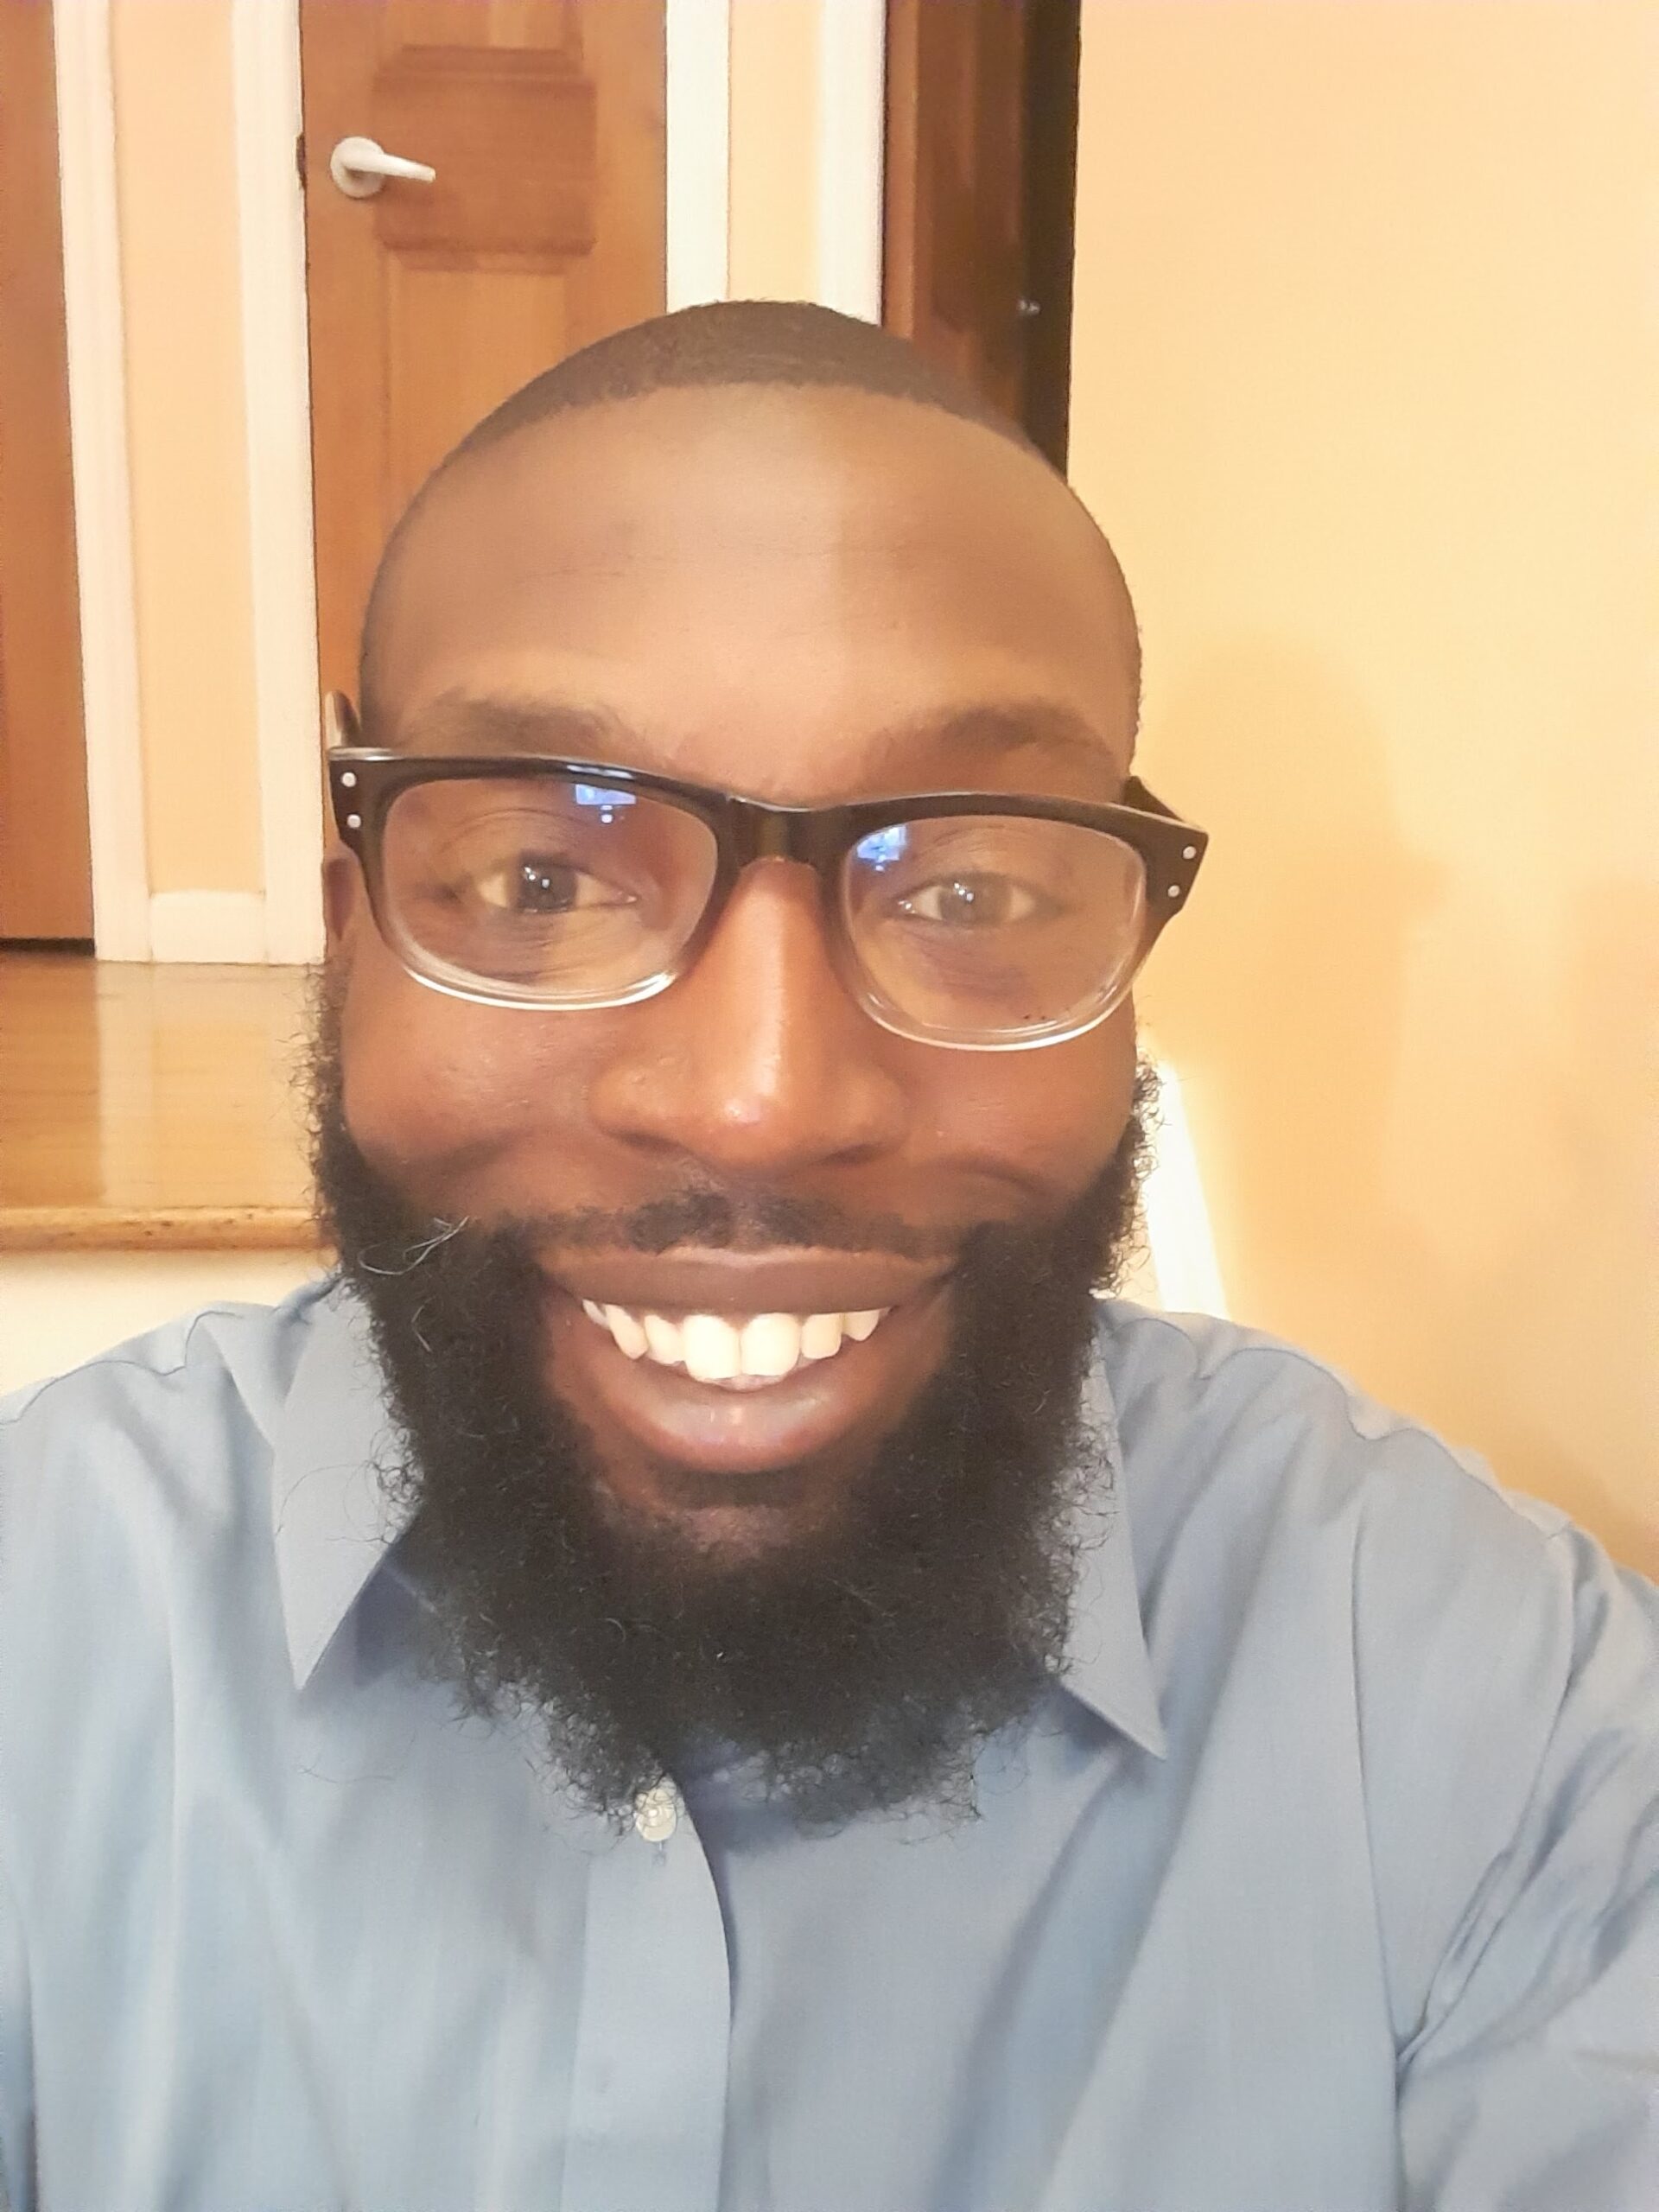 A man with a beard and glasses smiling